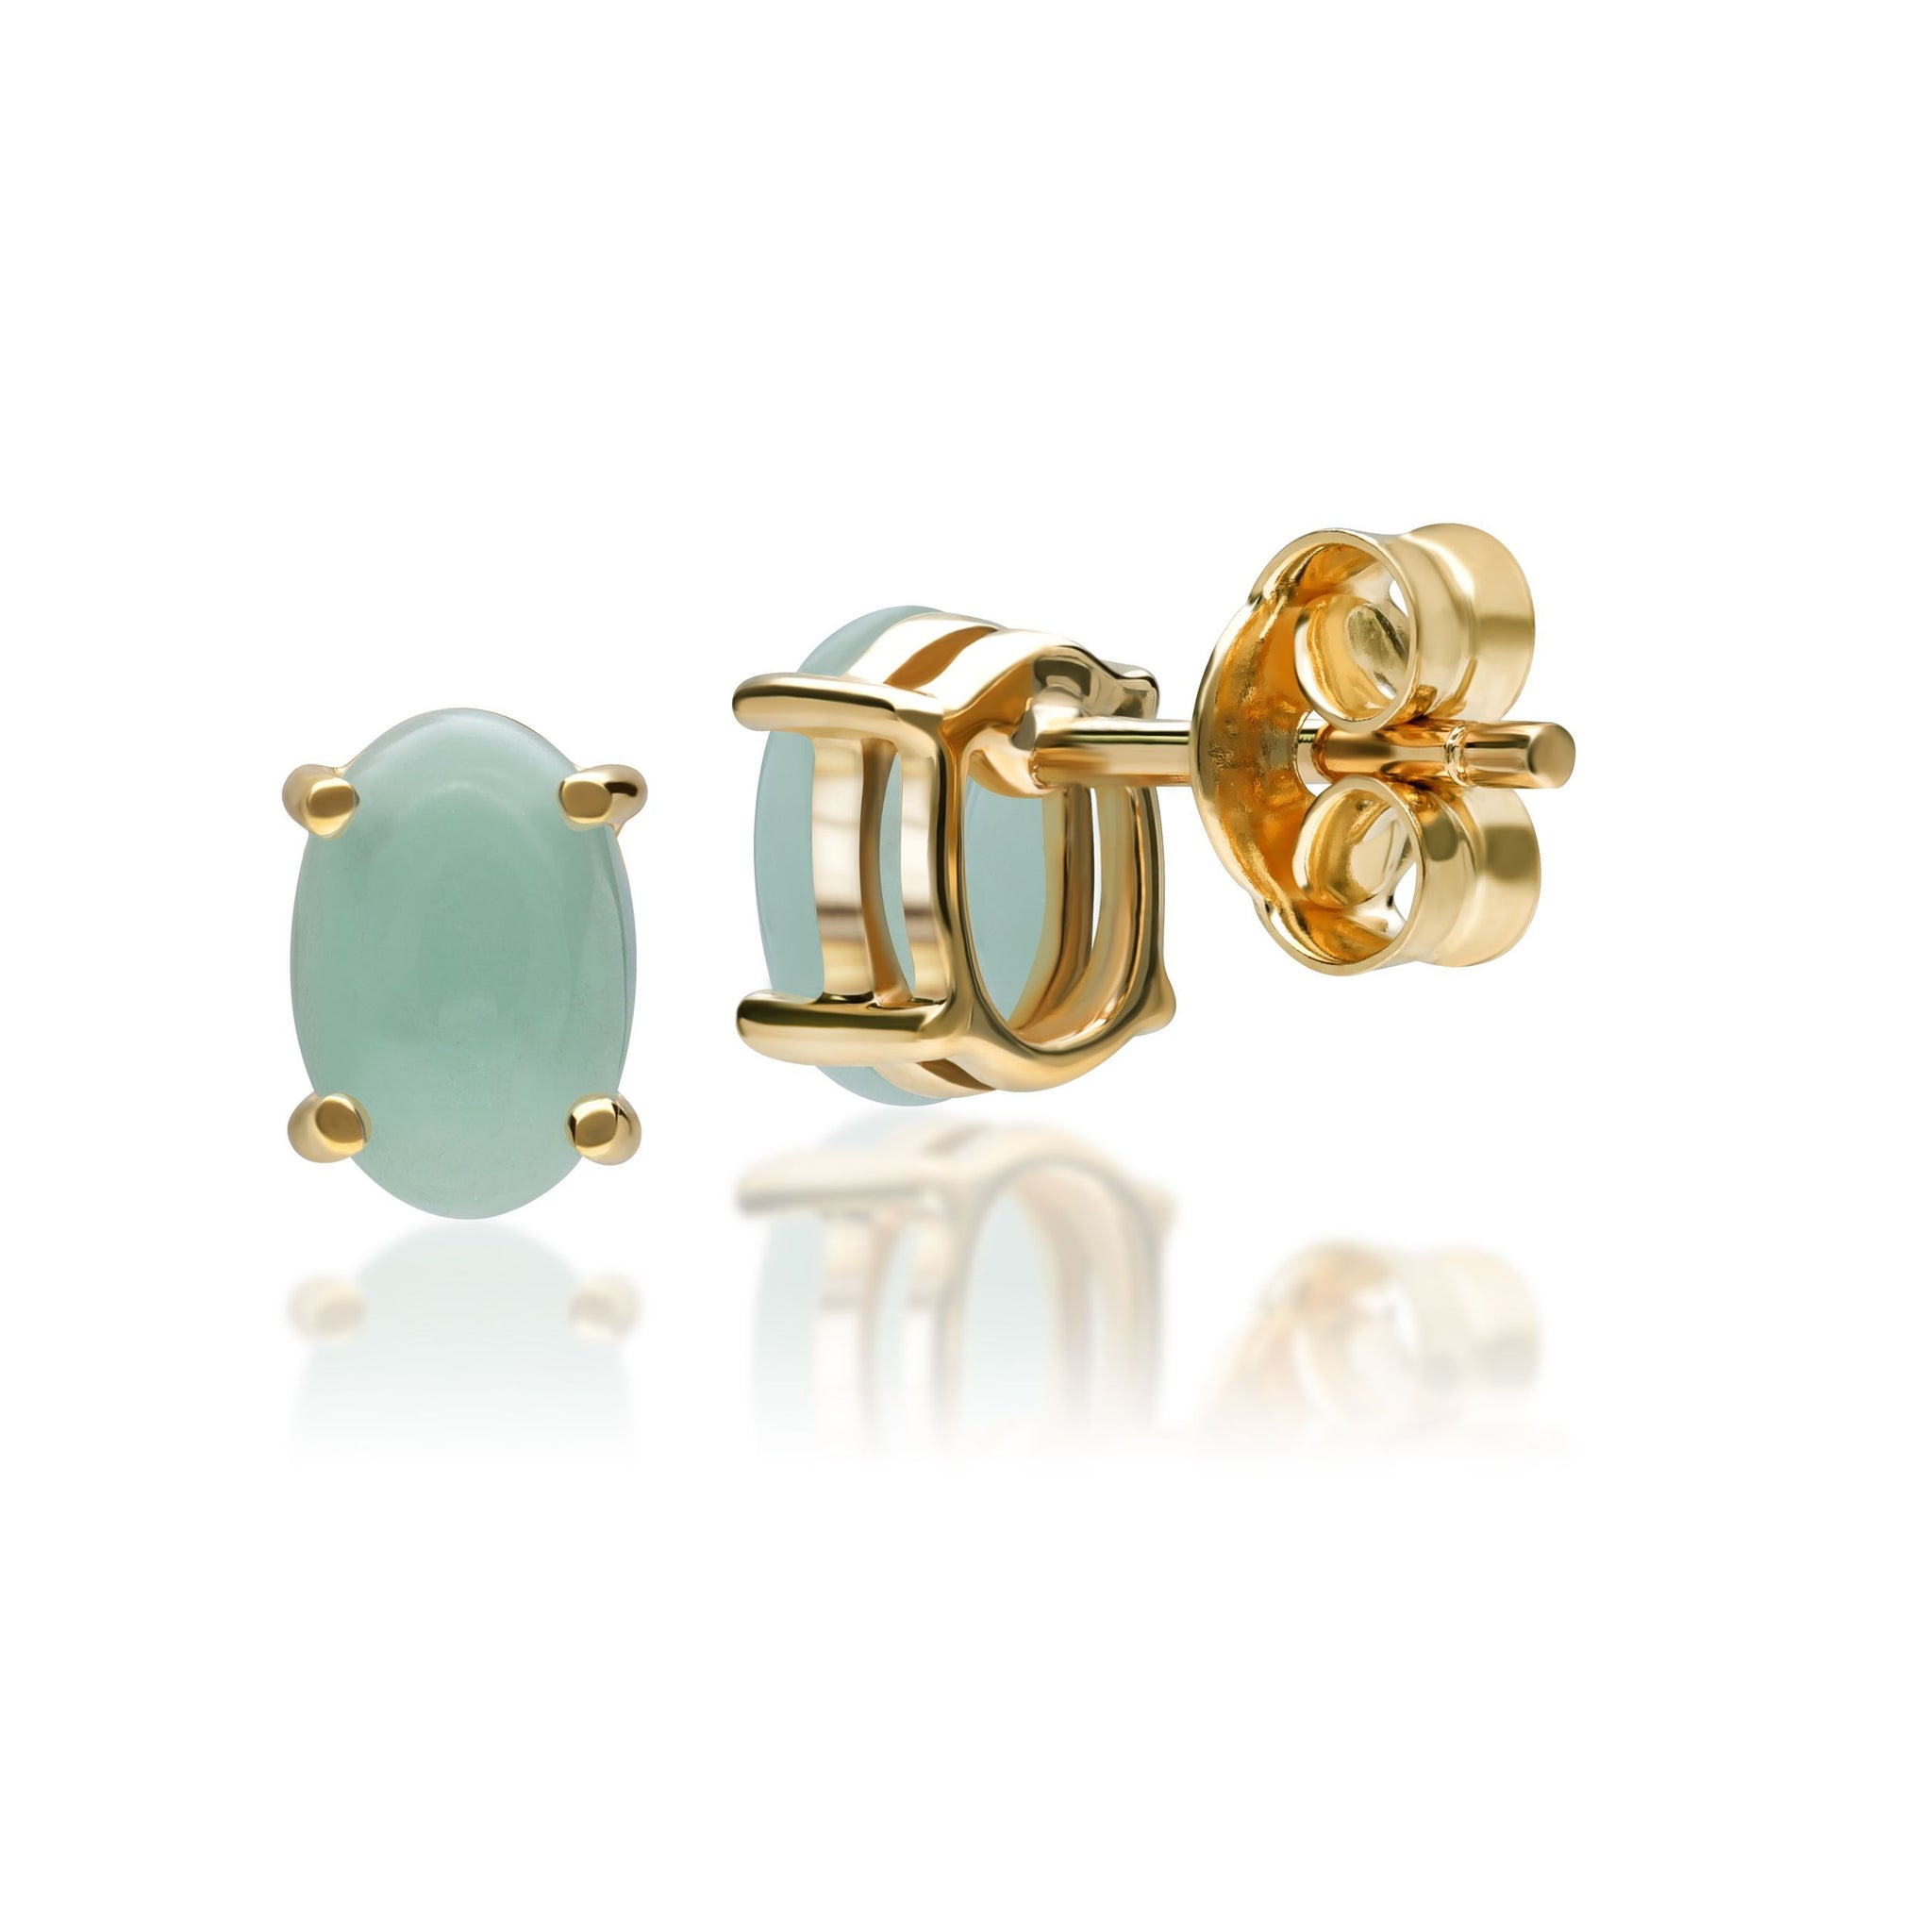 Classic Oval Jade Stud Earrings in 9ct Yellow Gold